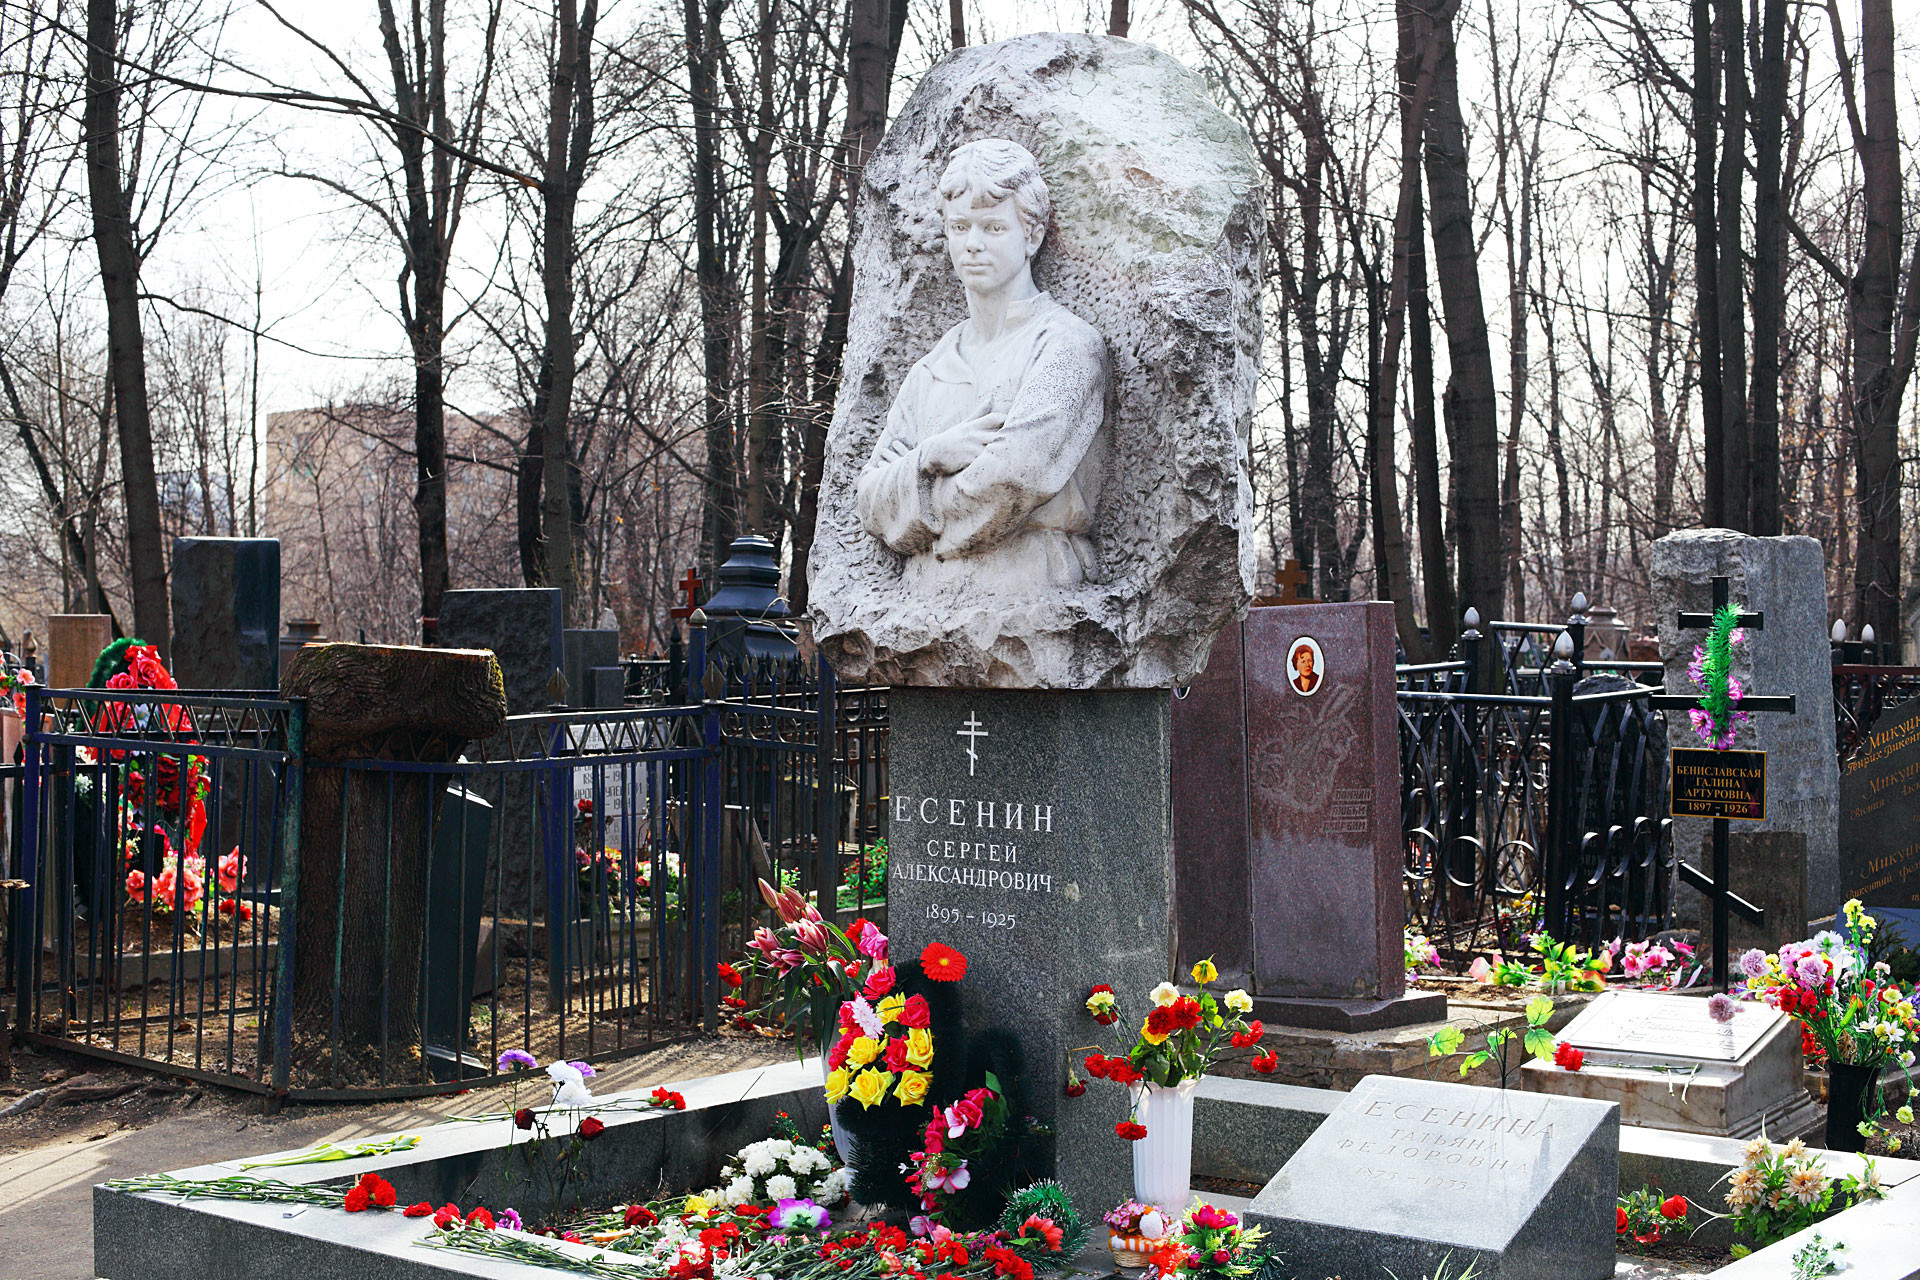 Sergey Yesenin's tombstone at Vagankovskoye cemetery, Moscow, Russia. Black cross with a green-and-purple wreath on the left side is on Galina Benislavskaya's grave.